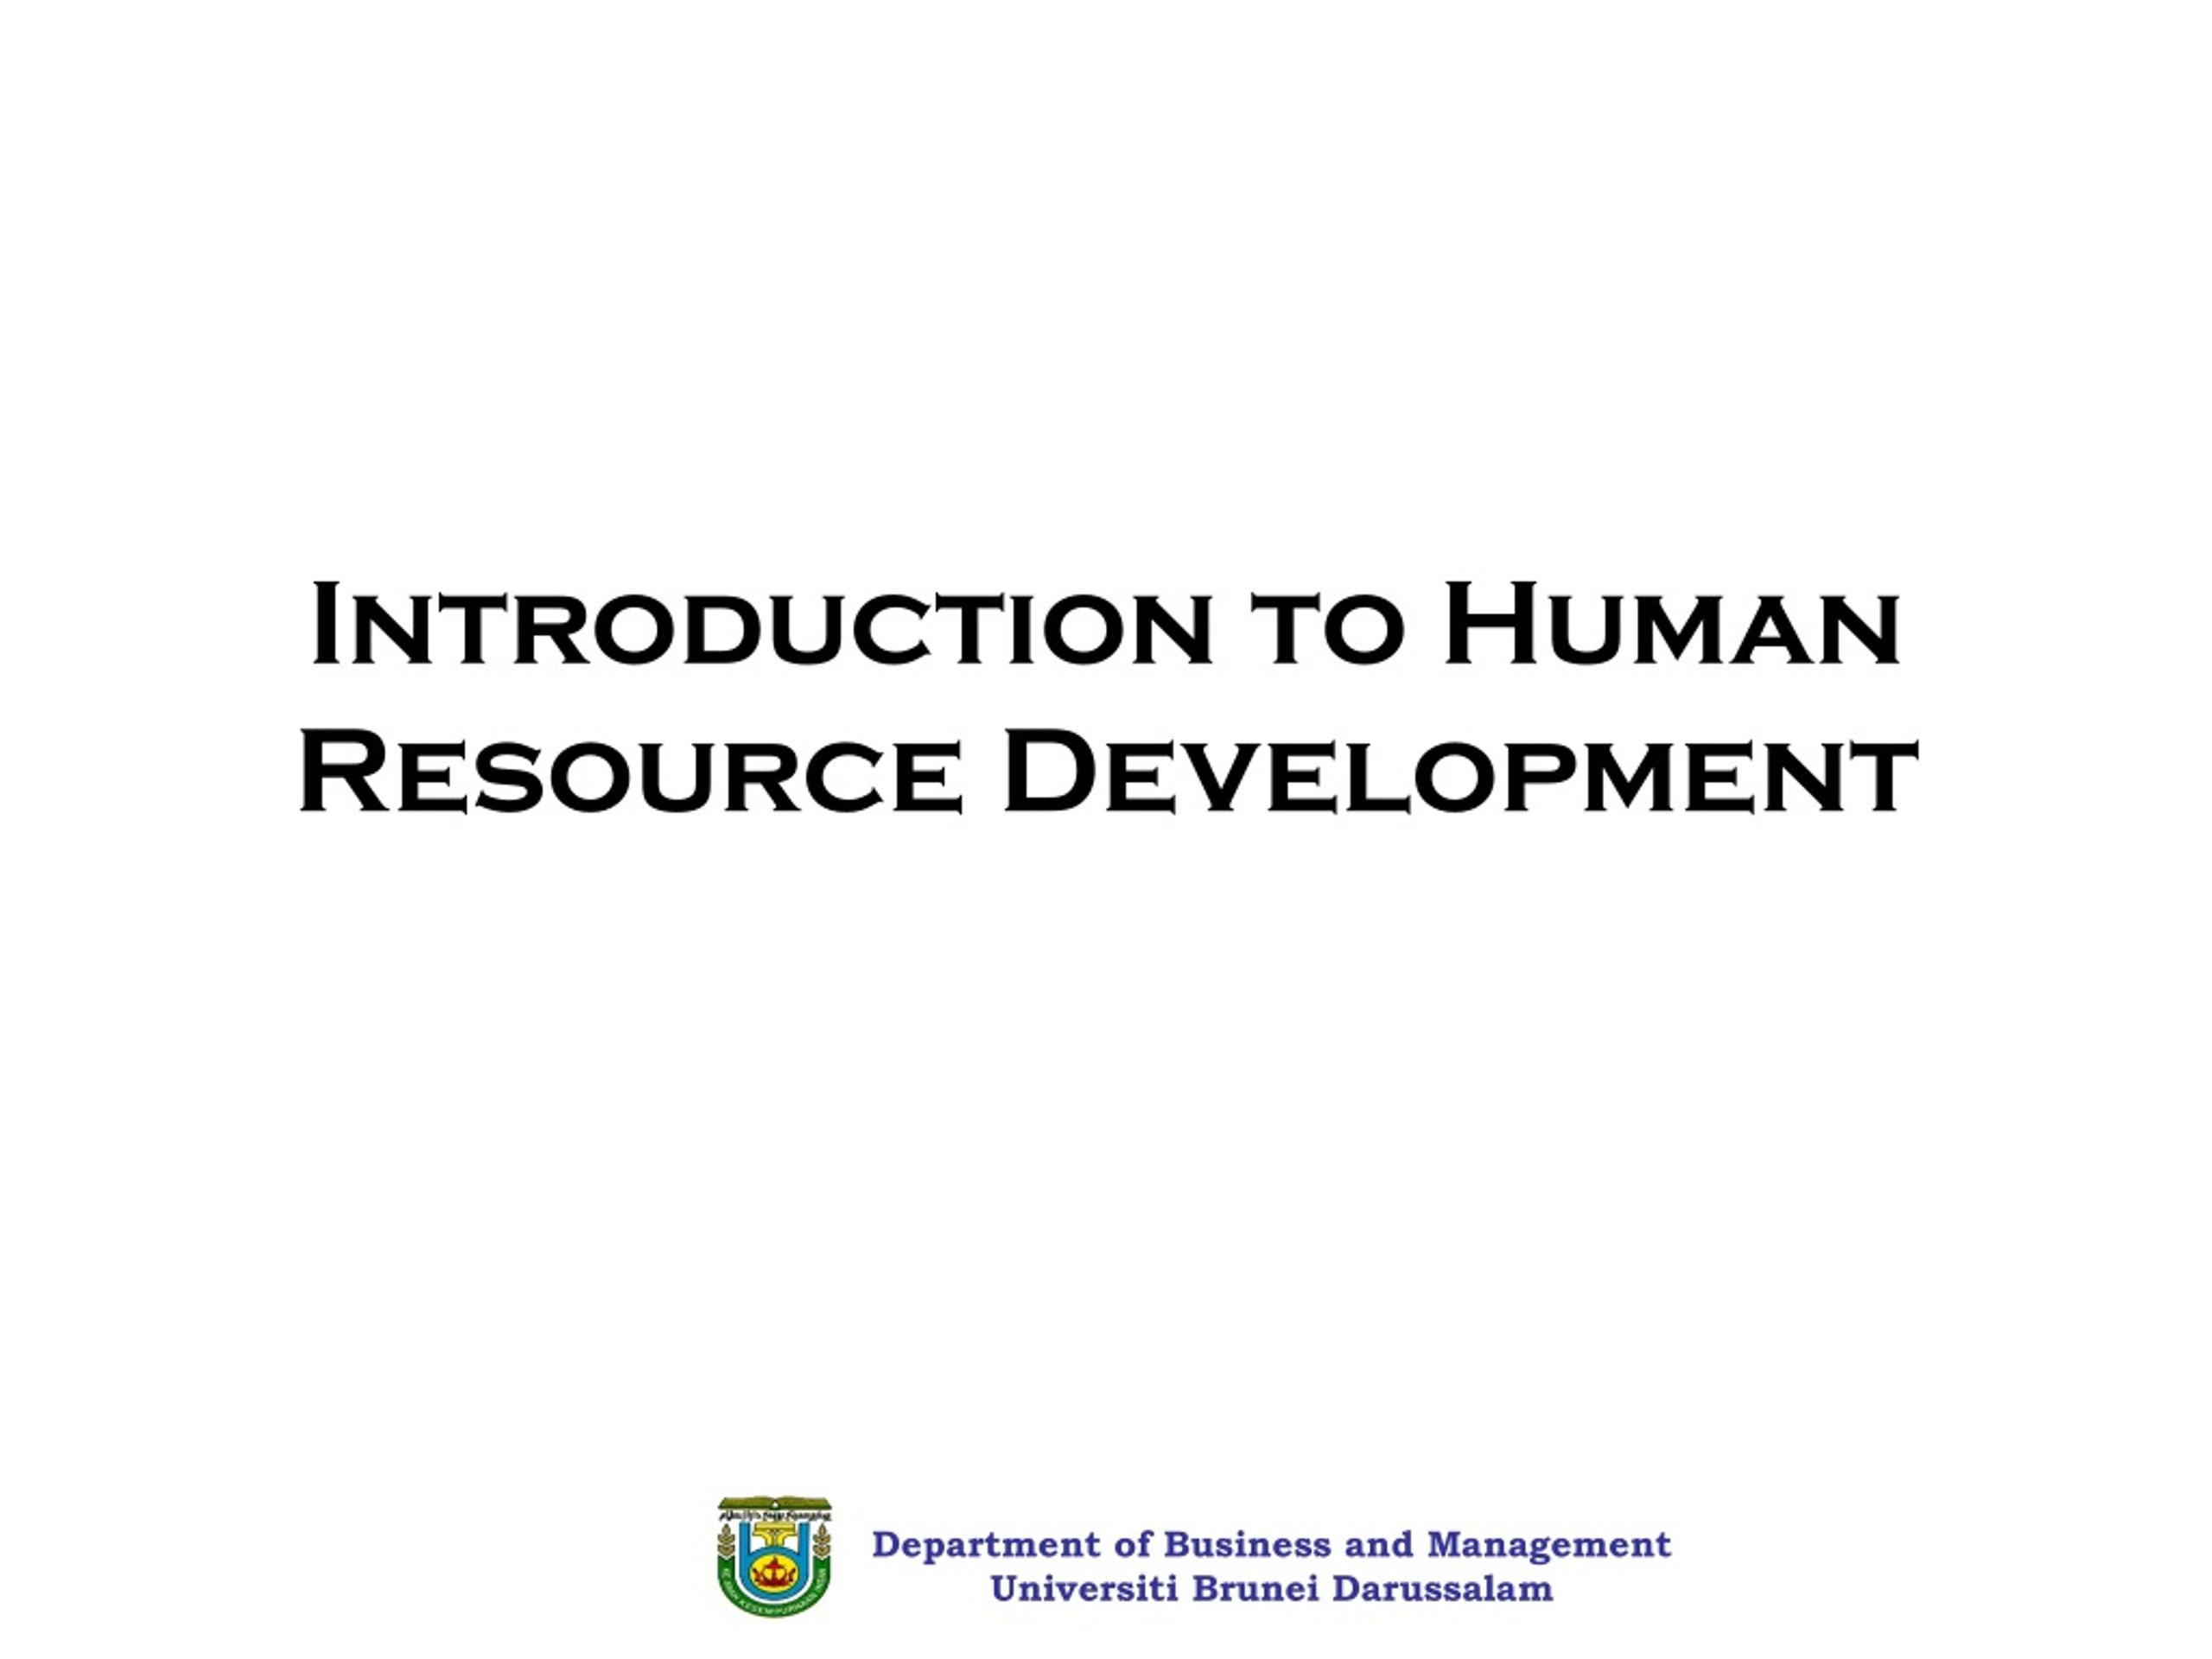 Ppt Introduction To Human Resource Development Powerpoint